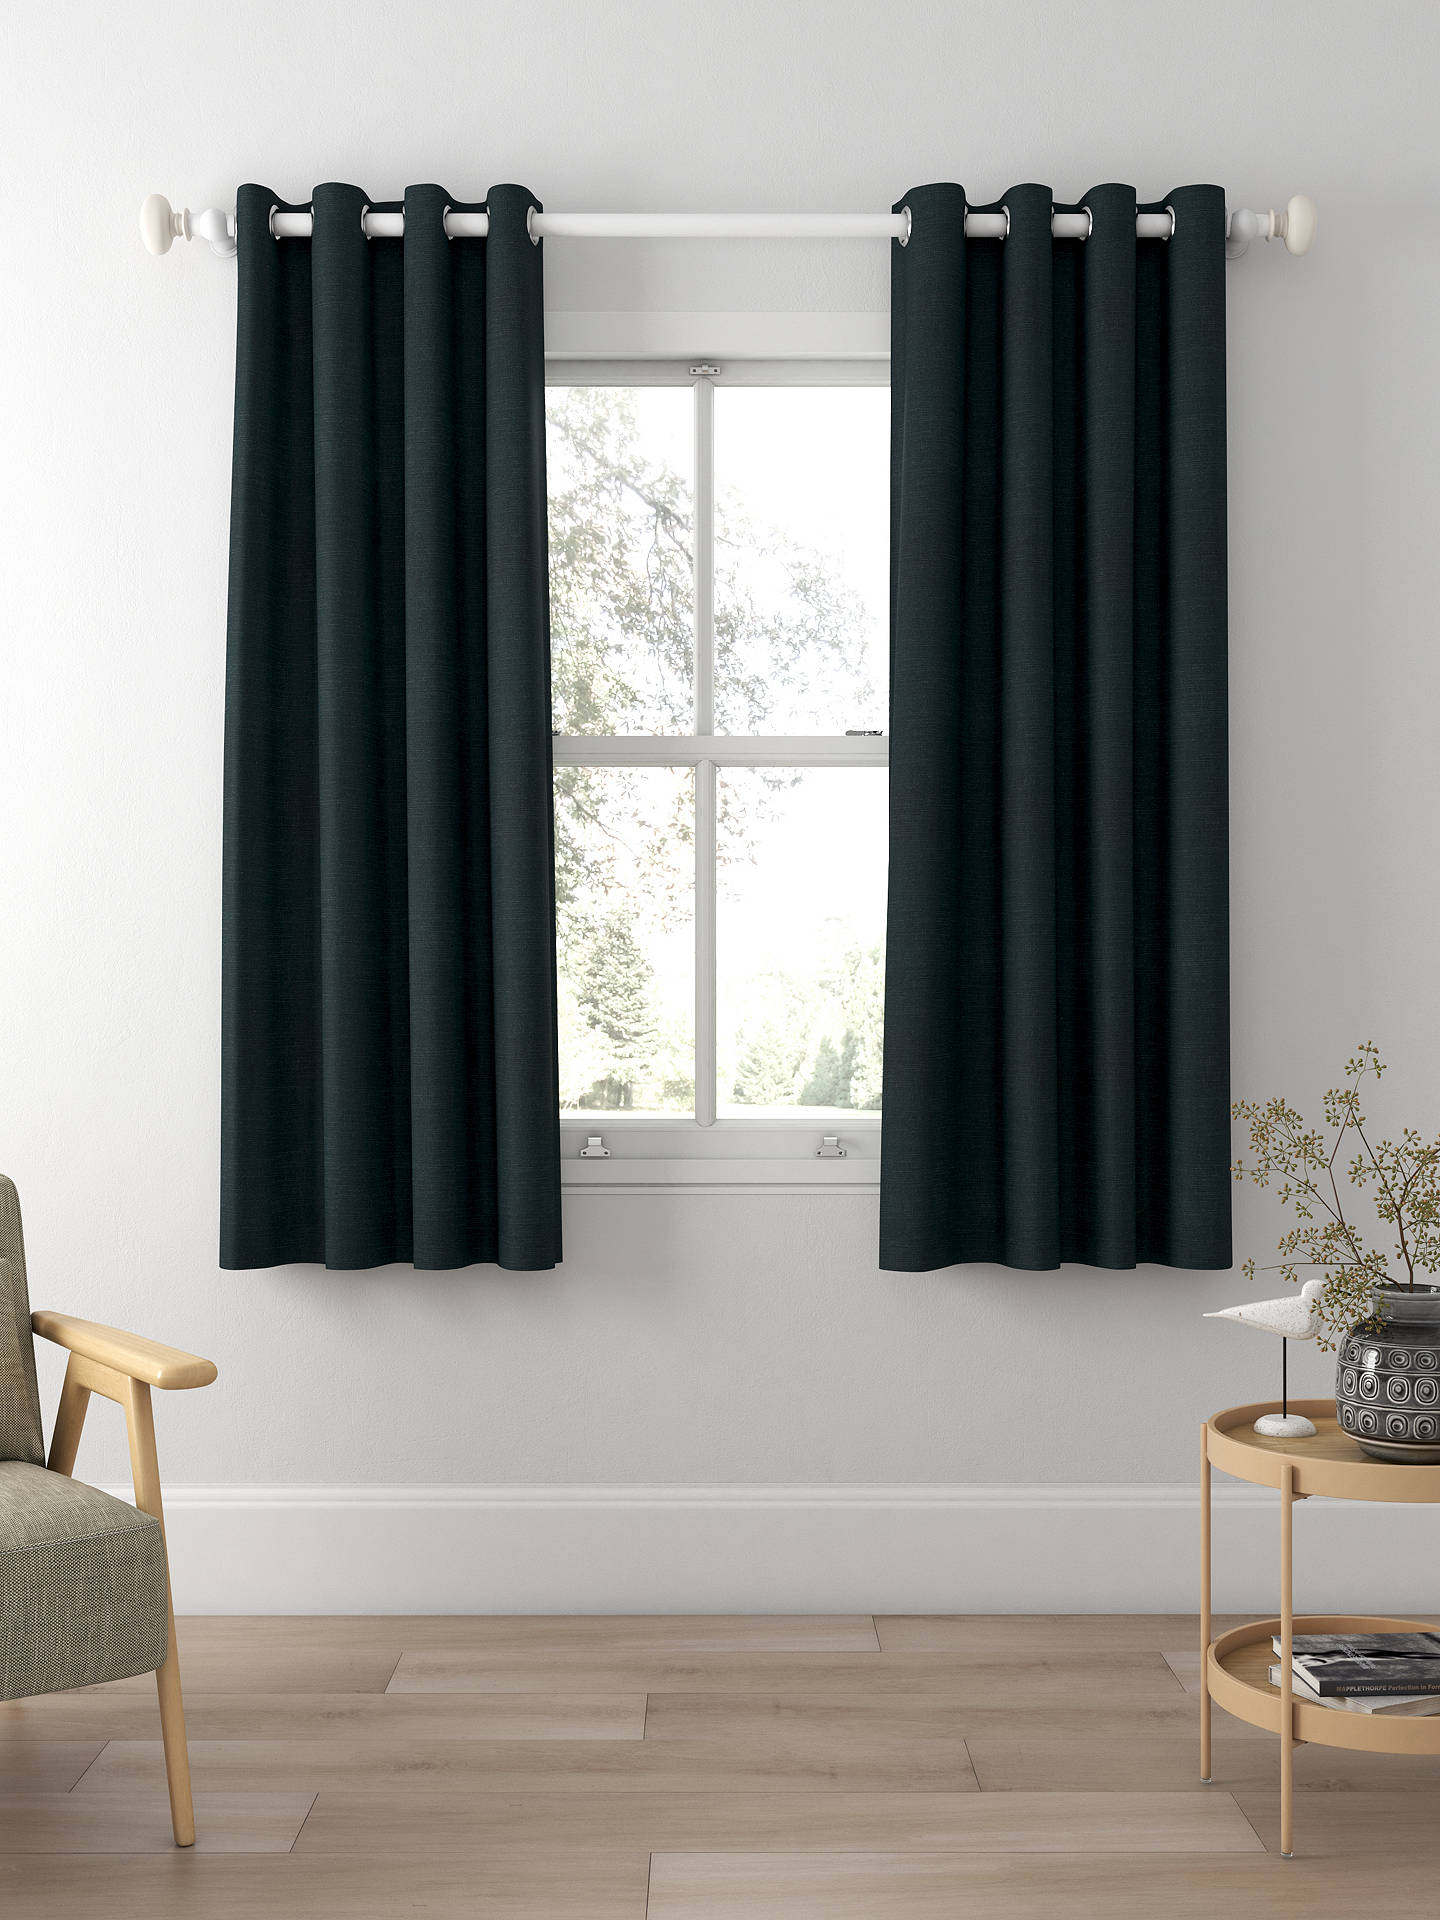 Sanderson Tuscany II Made to Measure Curtains, Carbon